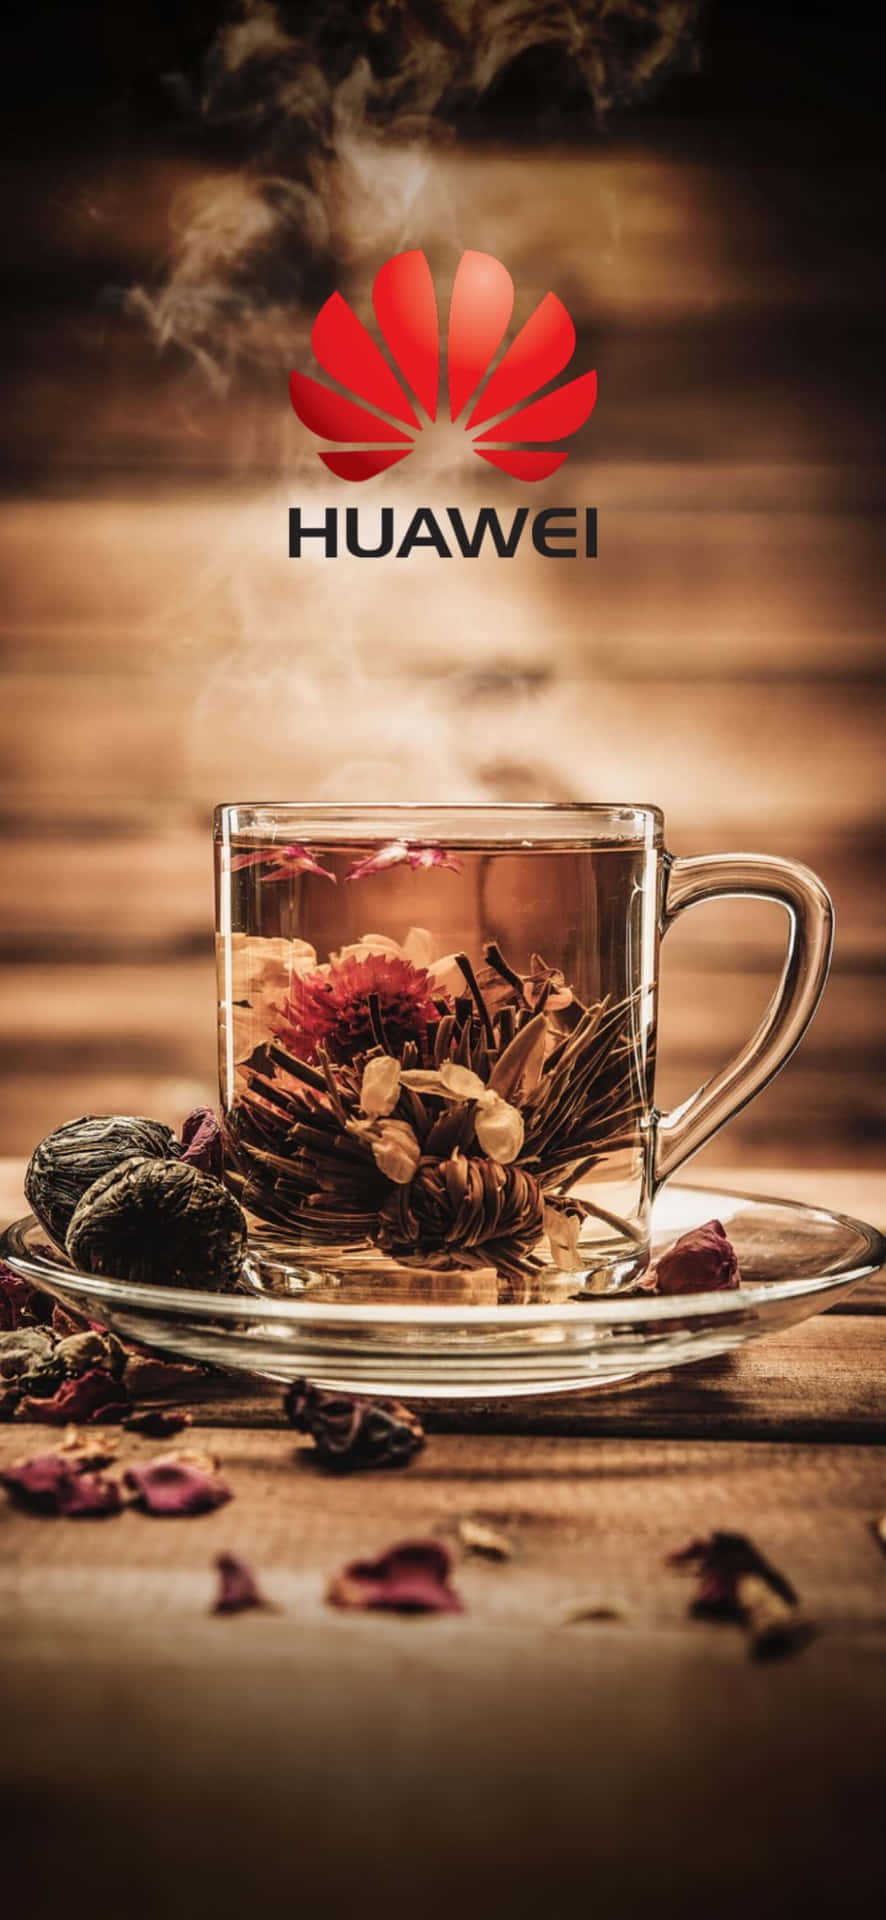 Get connected with Huawei.